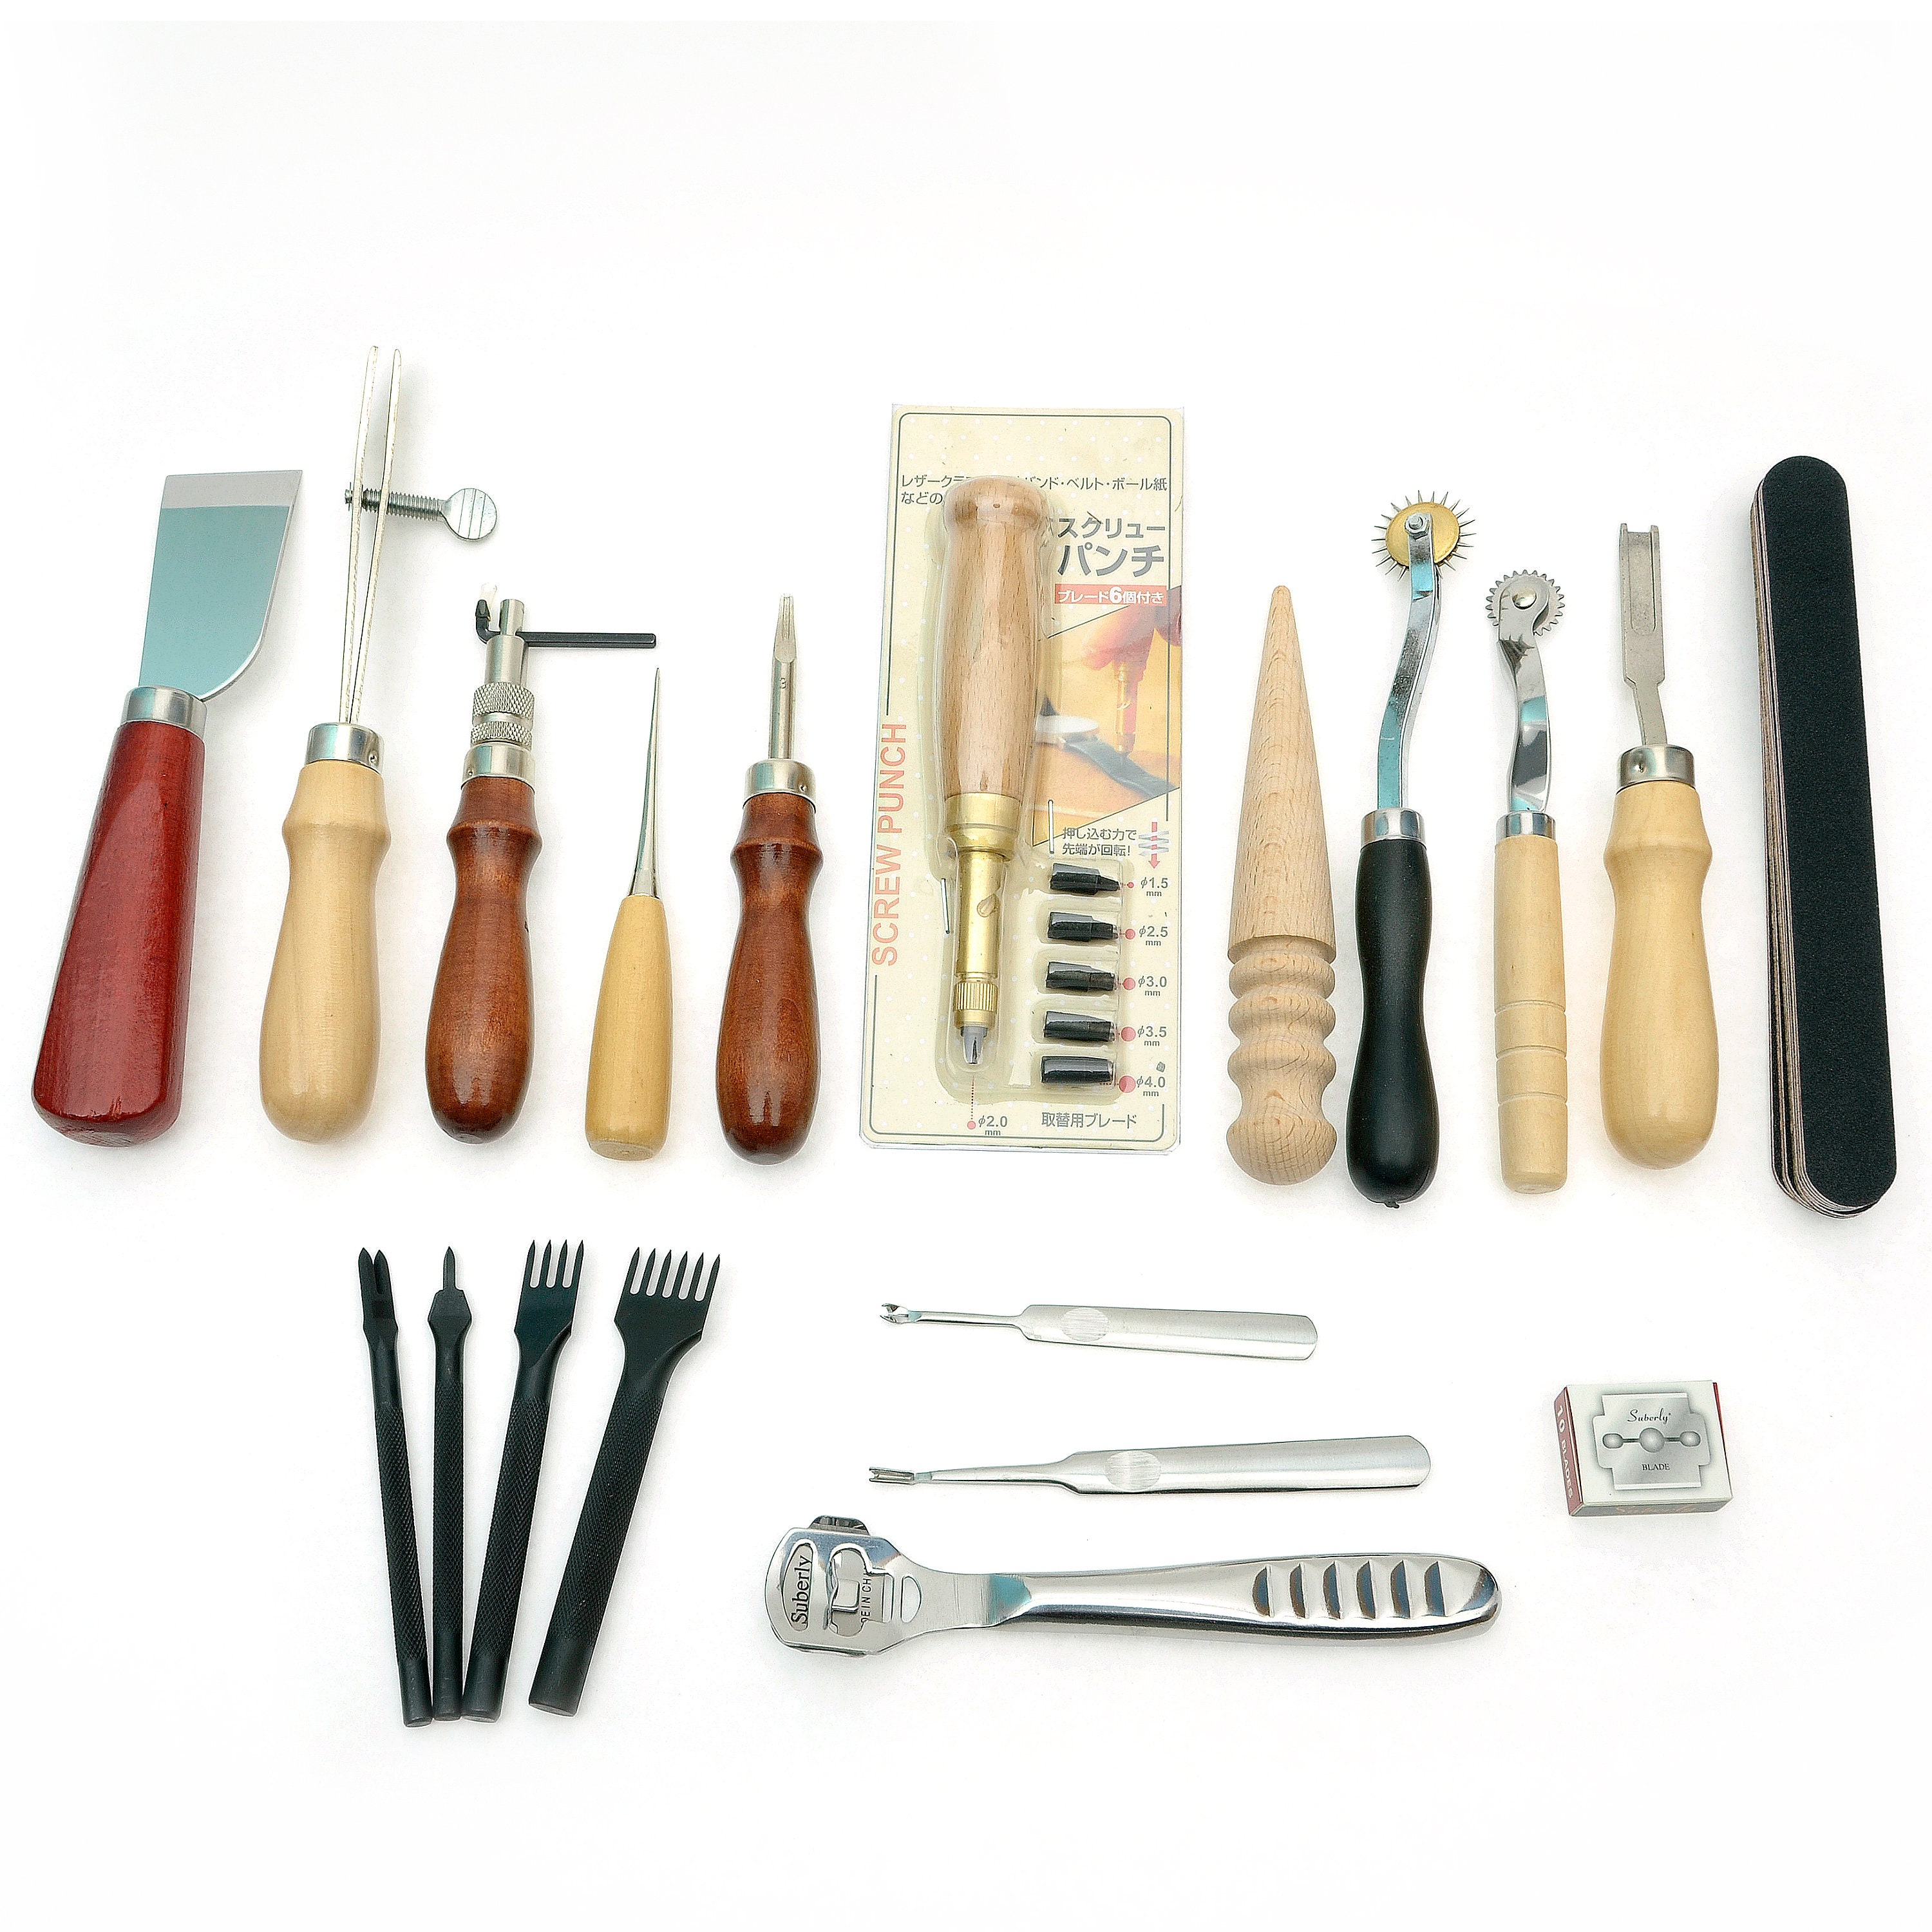 Leathercraft Working Tools Kit, Leather Craft Stamping Tools with Cutting  Mat, Stitching Groover, Prong Punch, Snaps, Rivets Kit and Professional  Stitching Sewing Tools for DIY Leathercraft